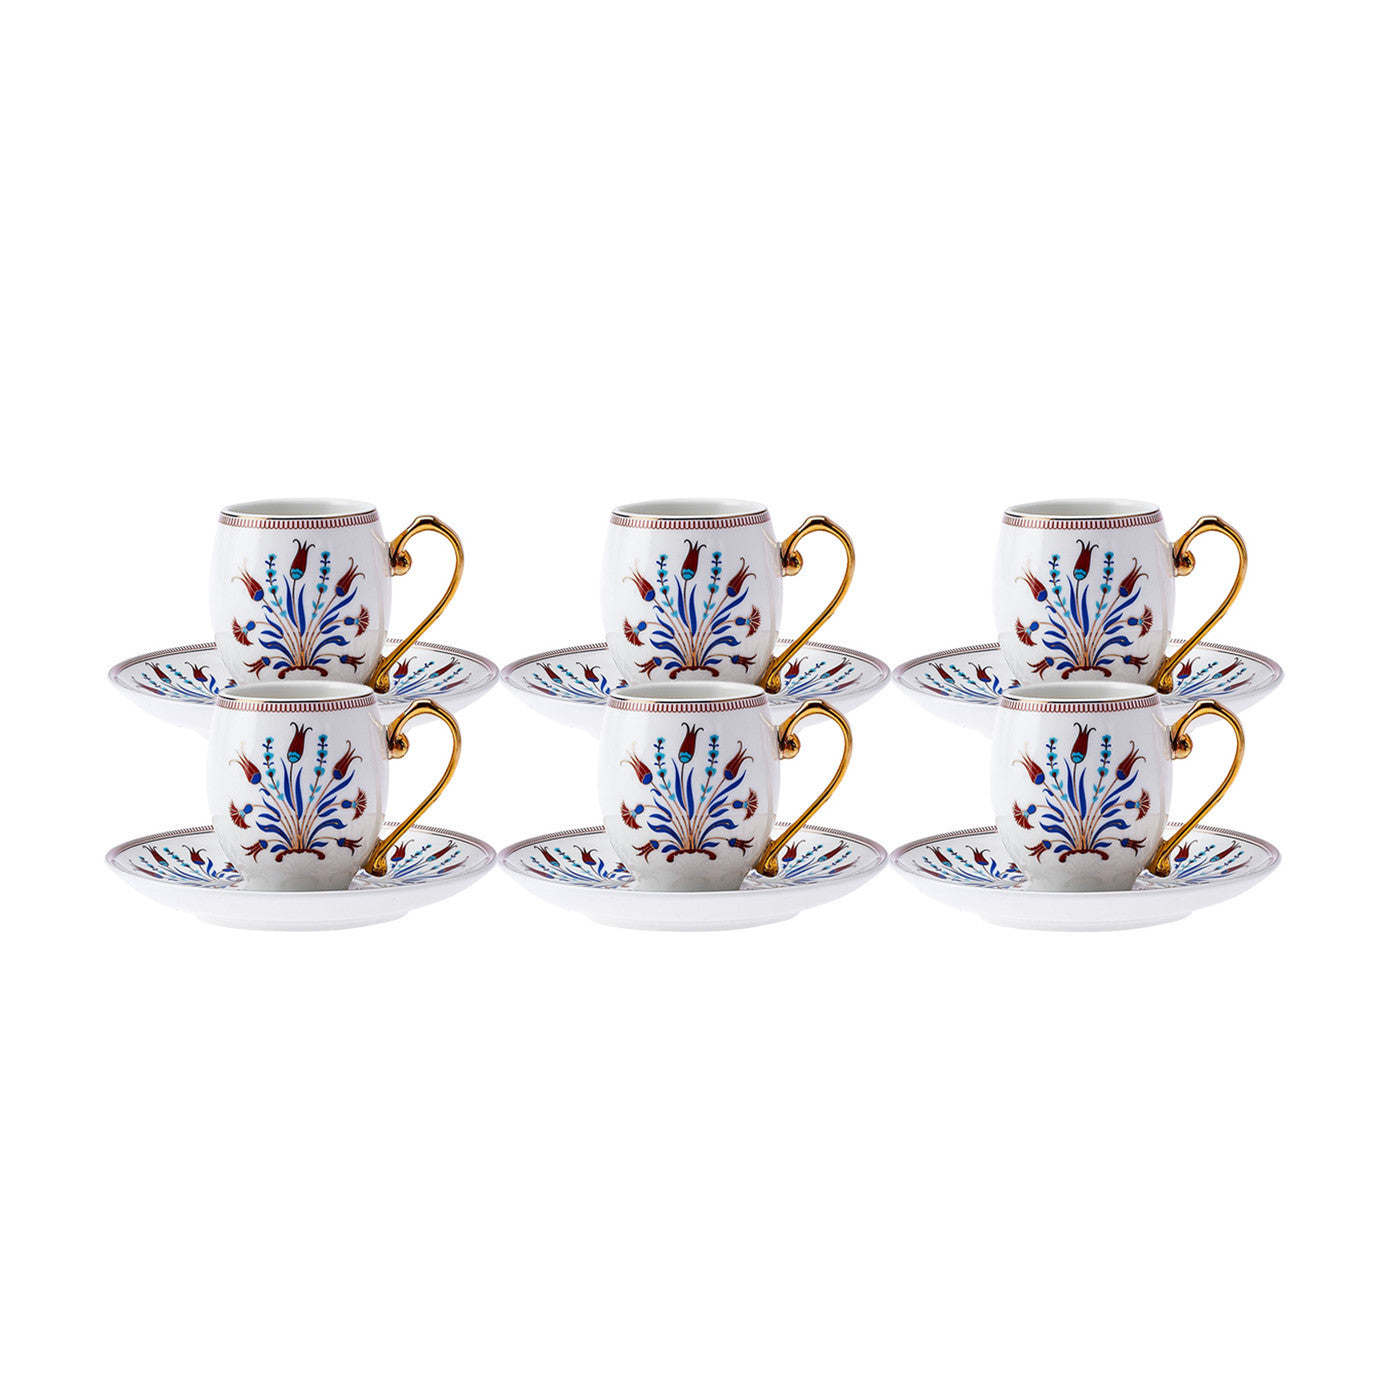 Finike, 12 Piece Porcelain Espresso Turkish Coffee Cup for 6 People, 80ml, White Multi